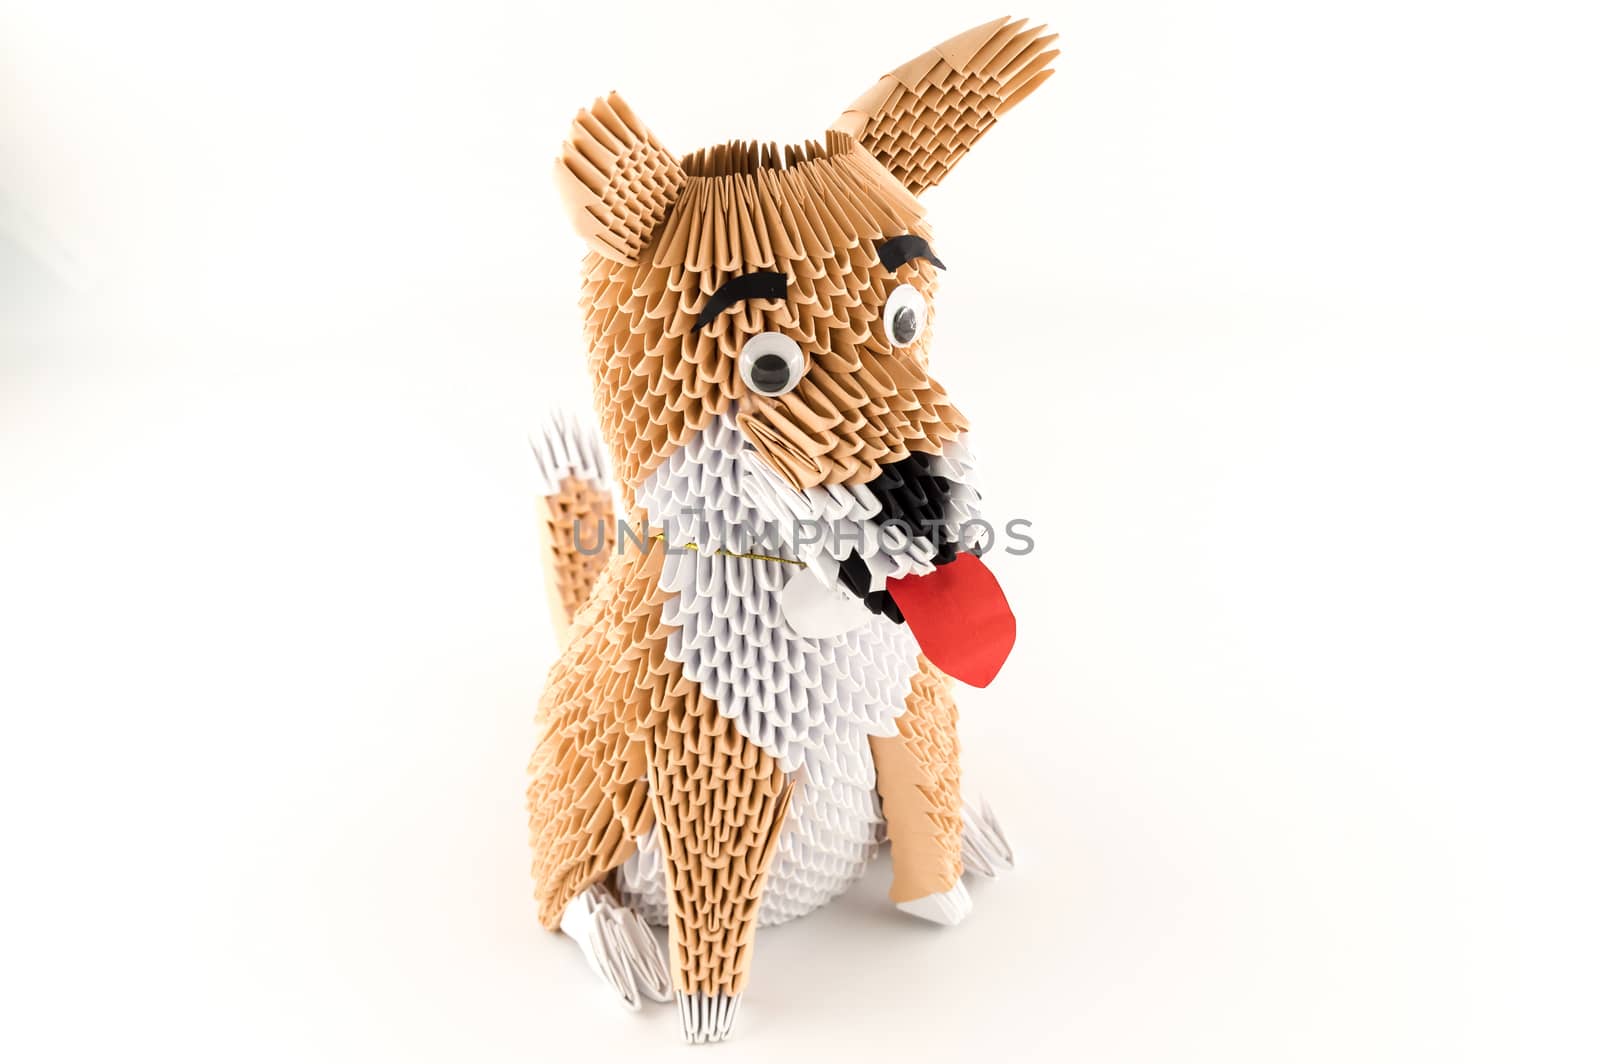 Dog sitting sticking out origami  by Philou1000